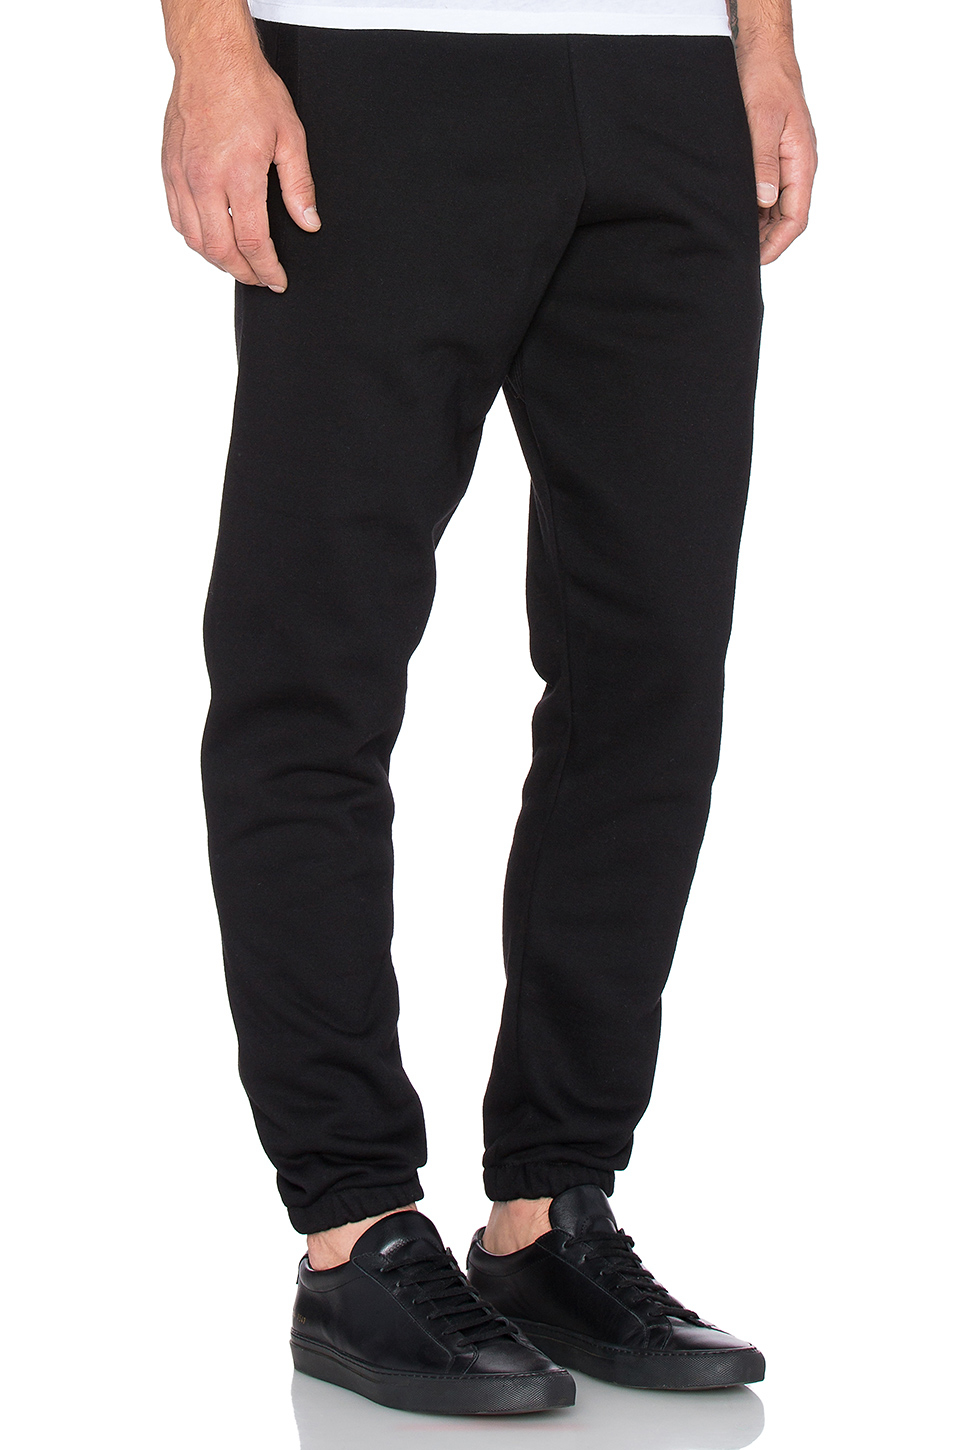 Carhartt Wip Chase Sweatpants Clearance Sale, UP TO 53% OFF |  www.editorialelpirata.com